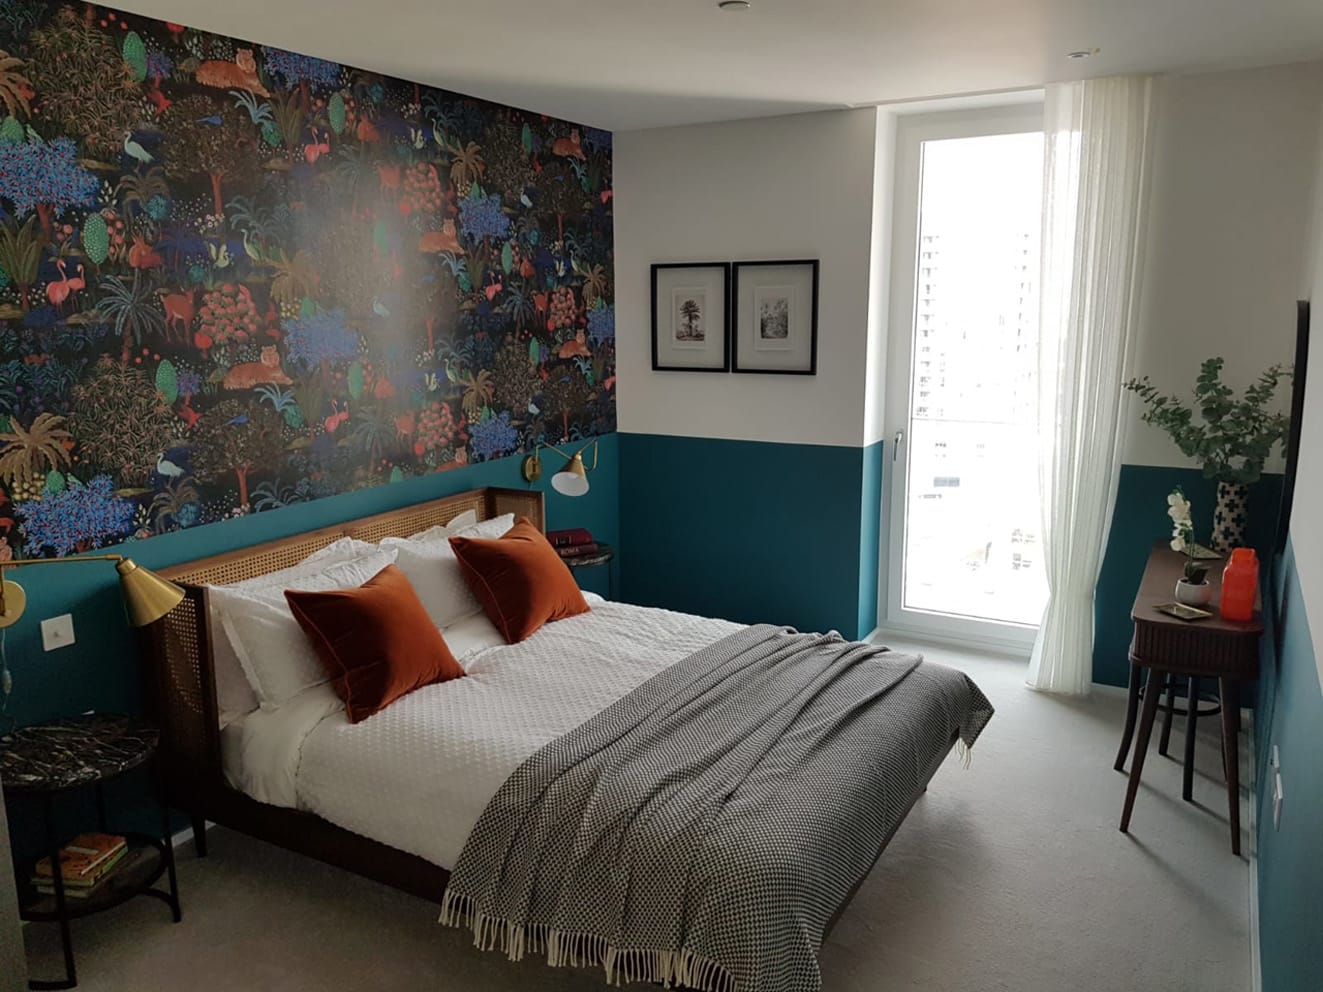 A feature wall “La Jardin du palais “by Pierre Frey wallpaper in a bedroom. The designers have chosen a bright colour for the lower part of the walls to be painted to compliment the wallpaper.